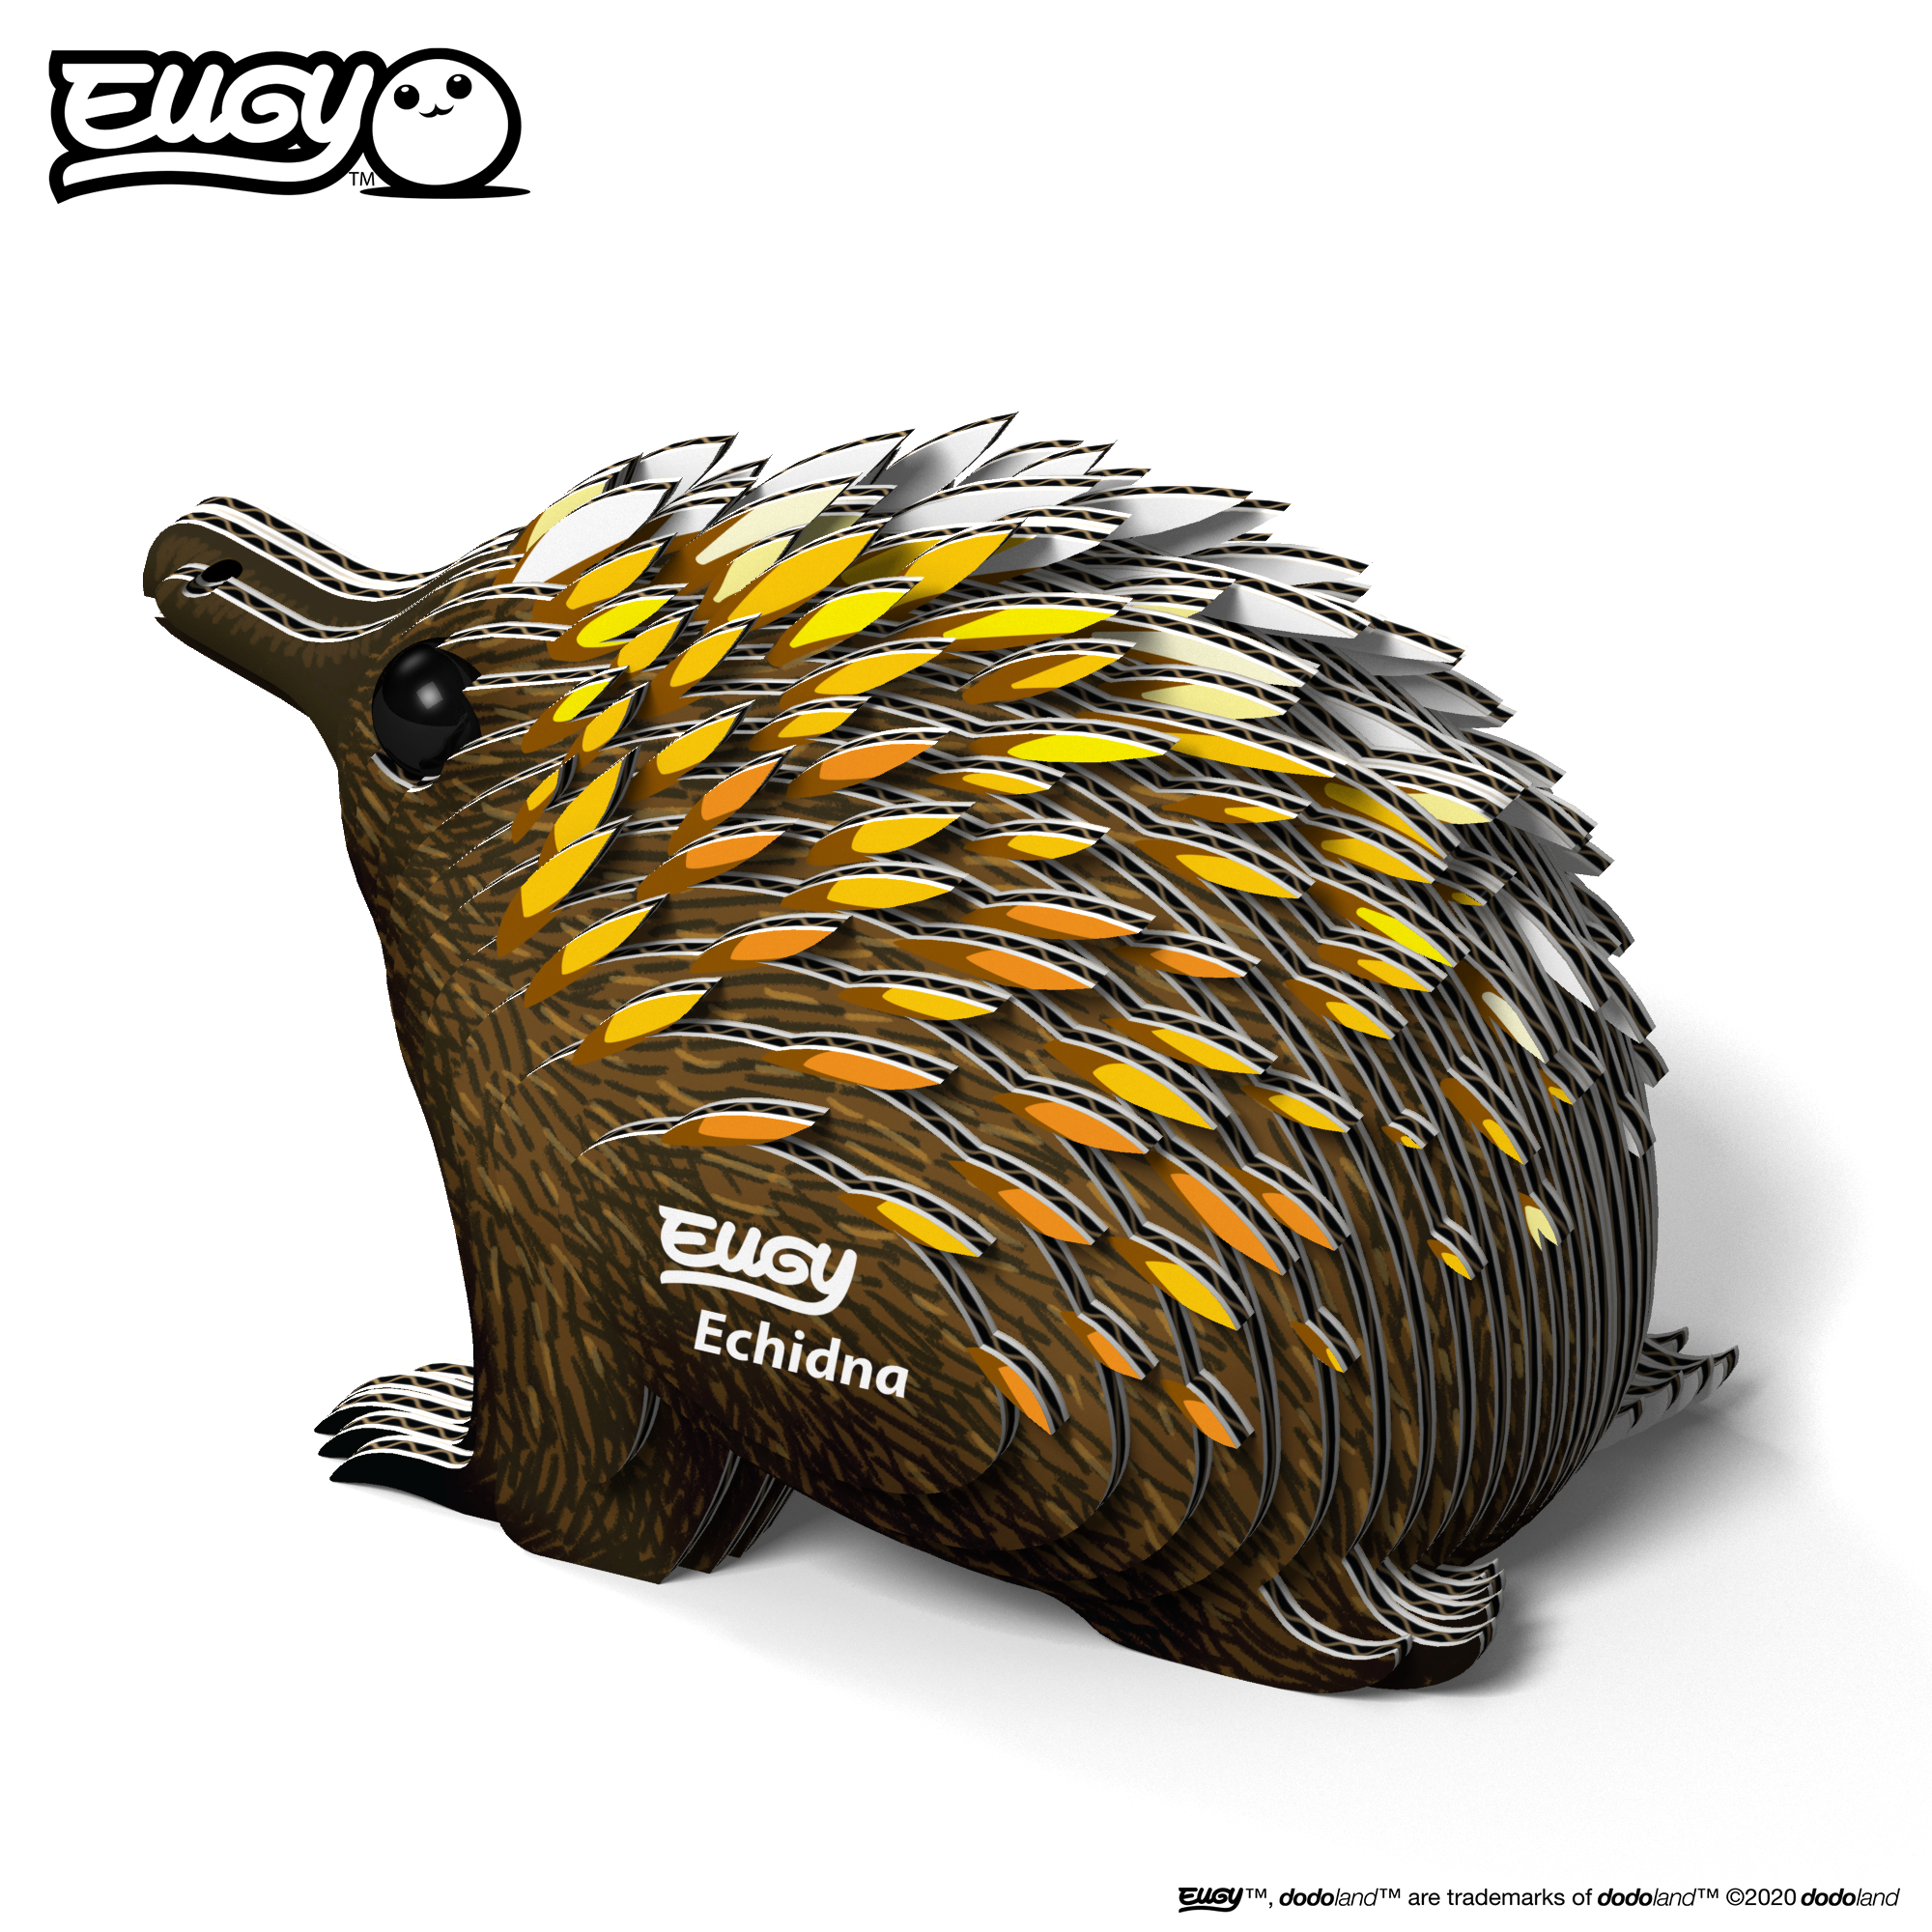 Image of an EUGY Echidna, facing left on an angle and viewed from the rear,against a white background